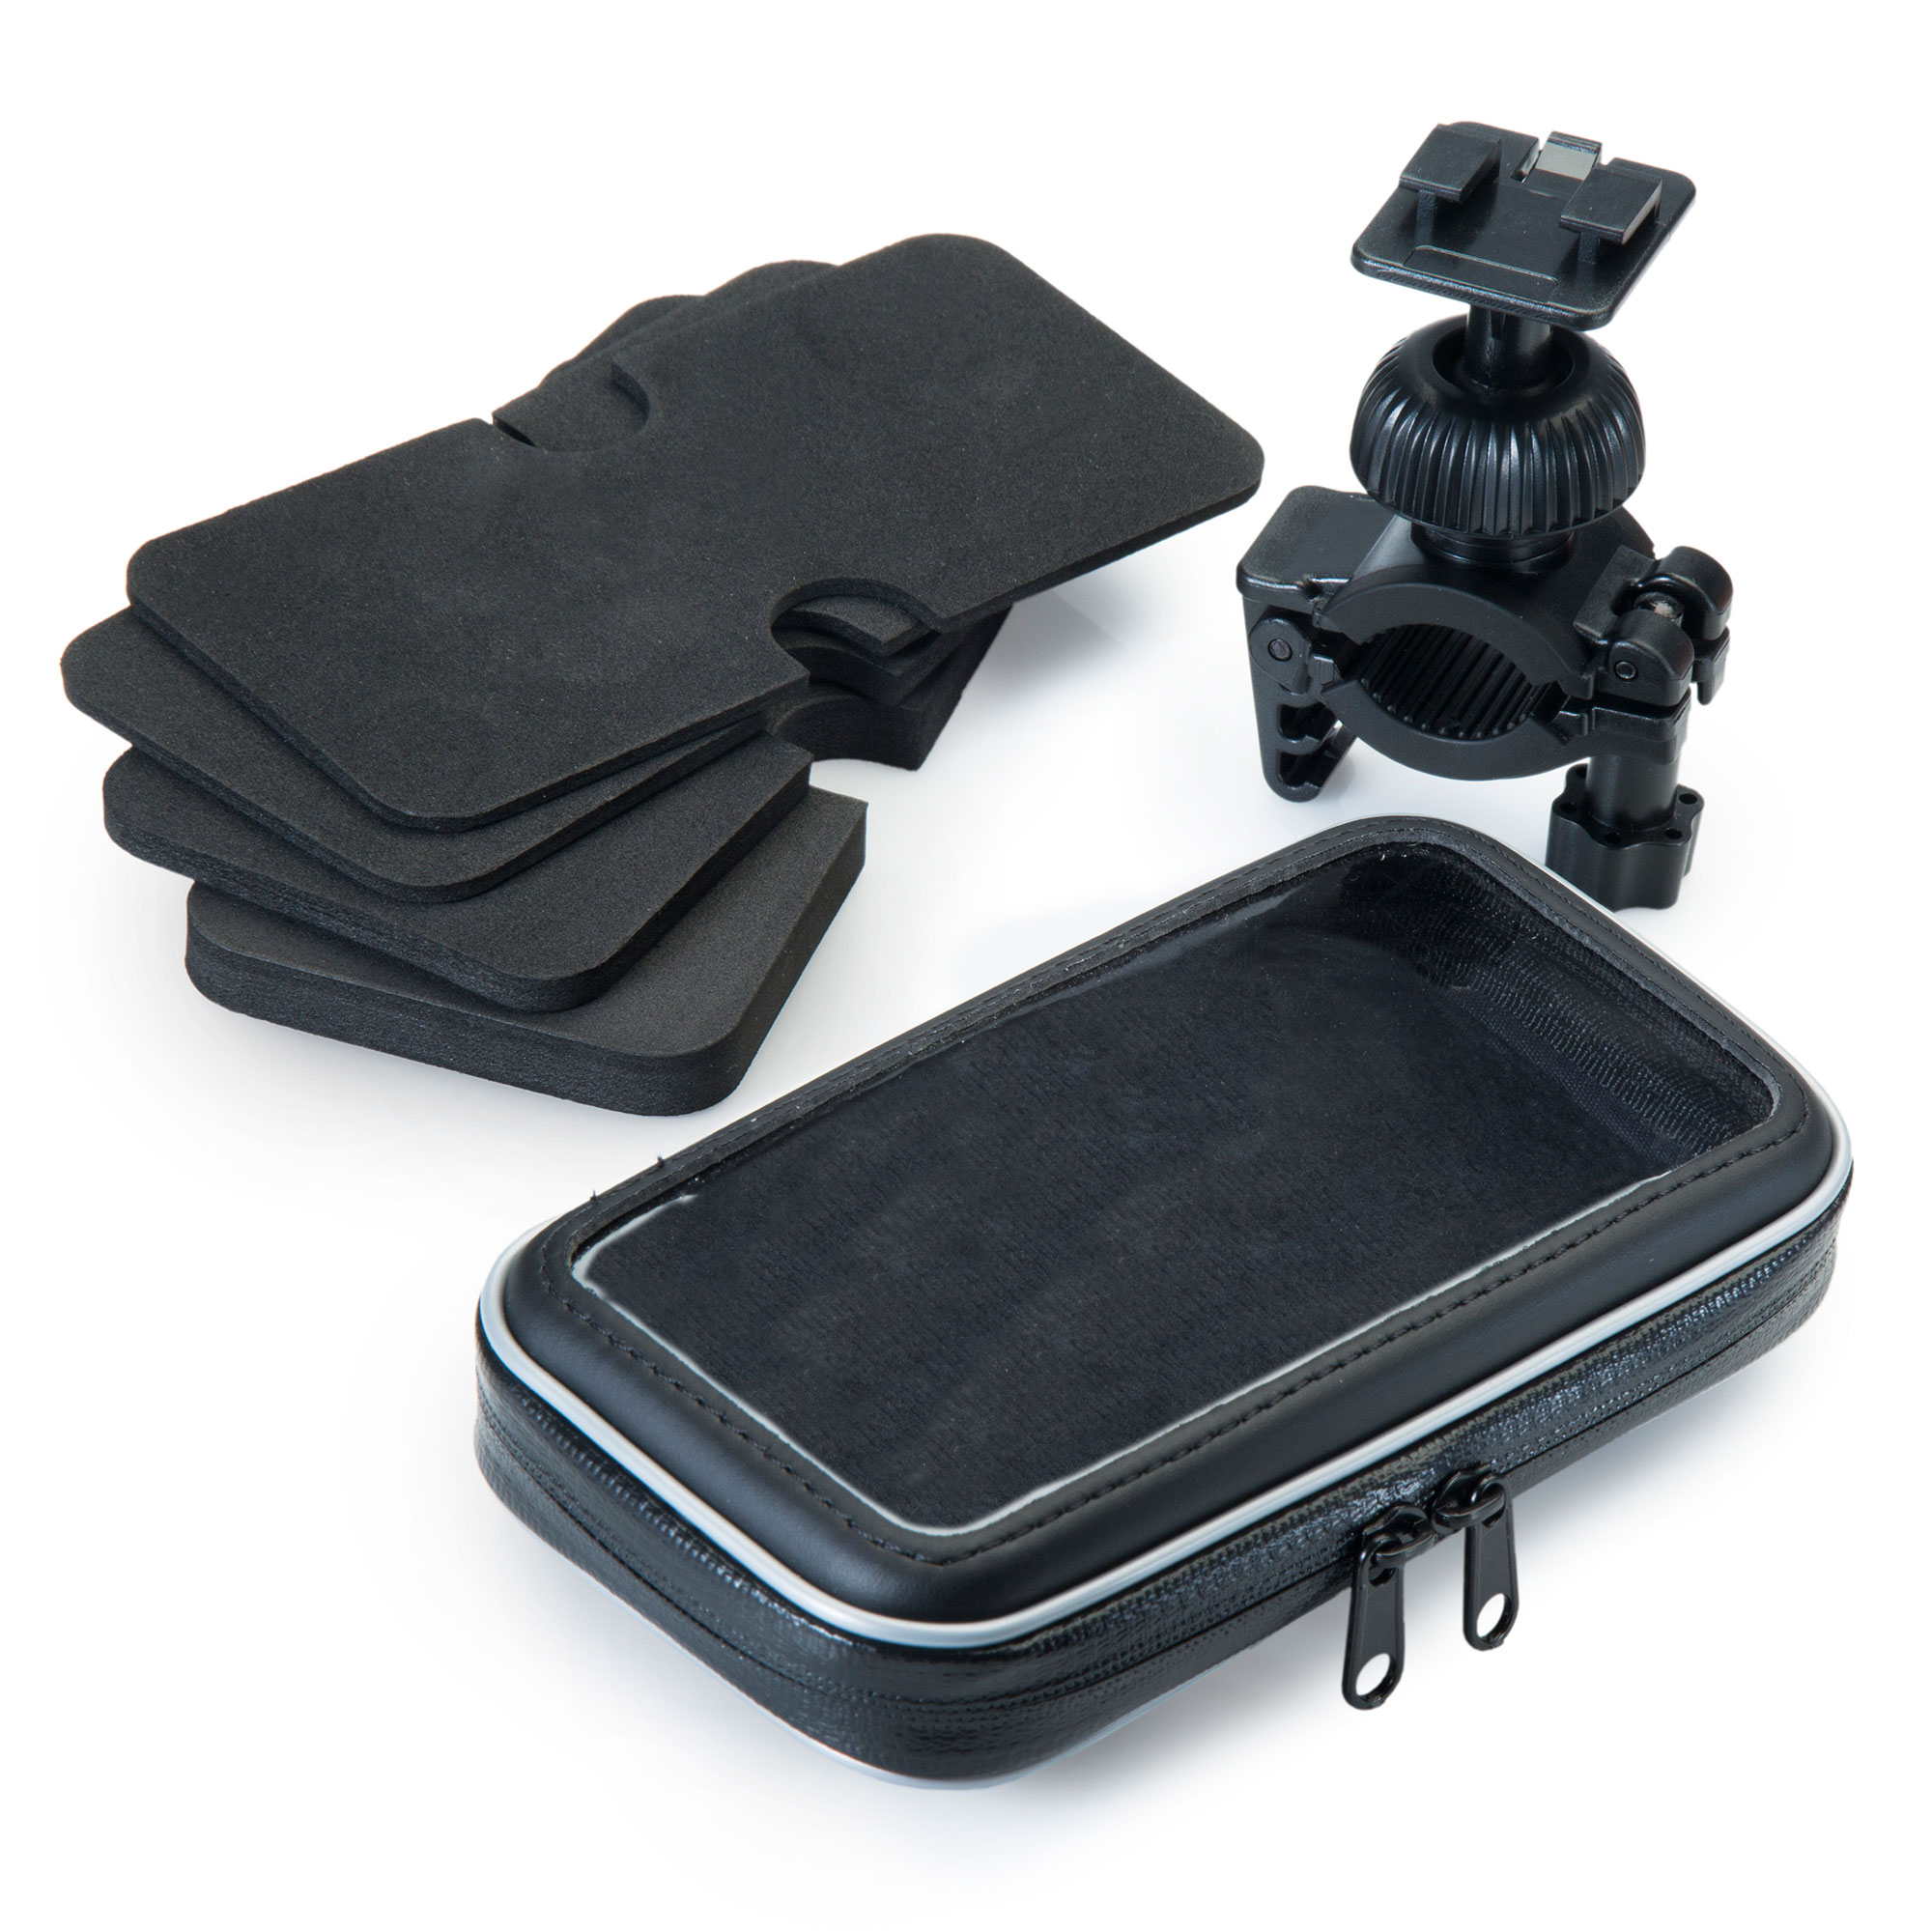 Heavy Duty Weather Resistant Bicycle / Motorcycle Handlebar Mount Holder Designed for the HTC Pyramid